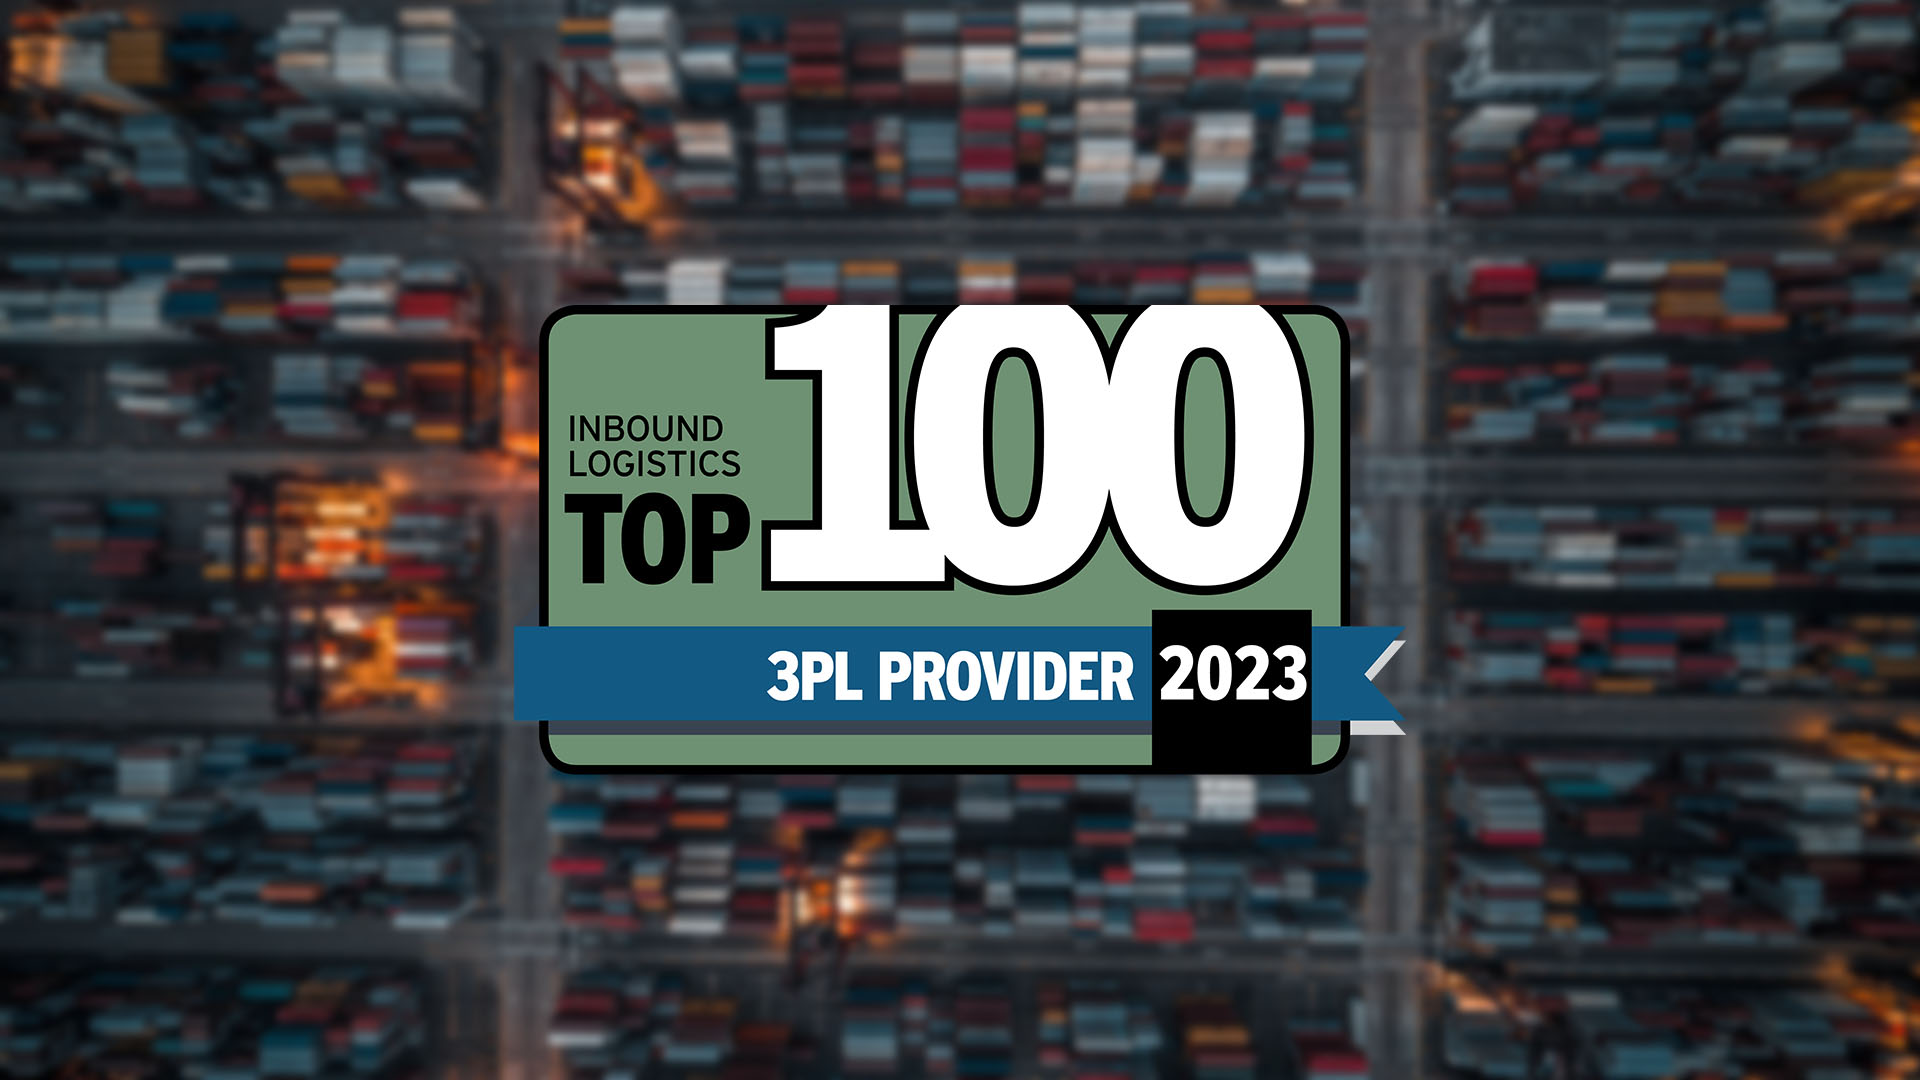 Featured image for “Rinchem Awarded Inbound Logistics’ Top 100 3PL Providers for 2023”